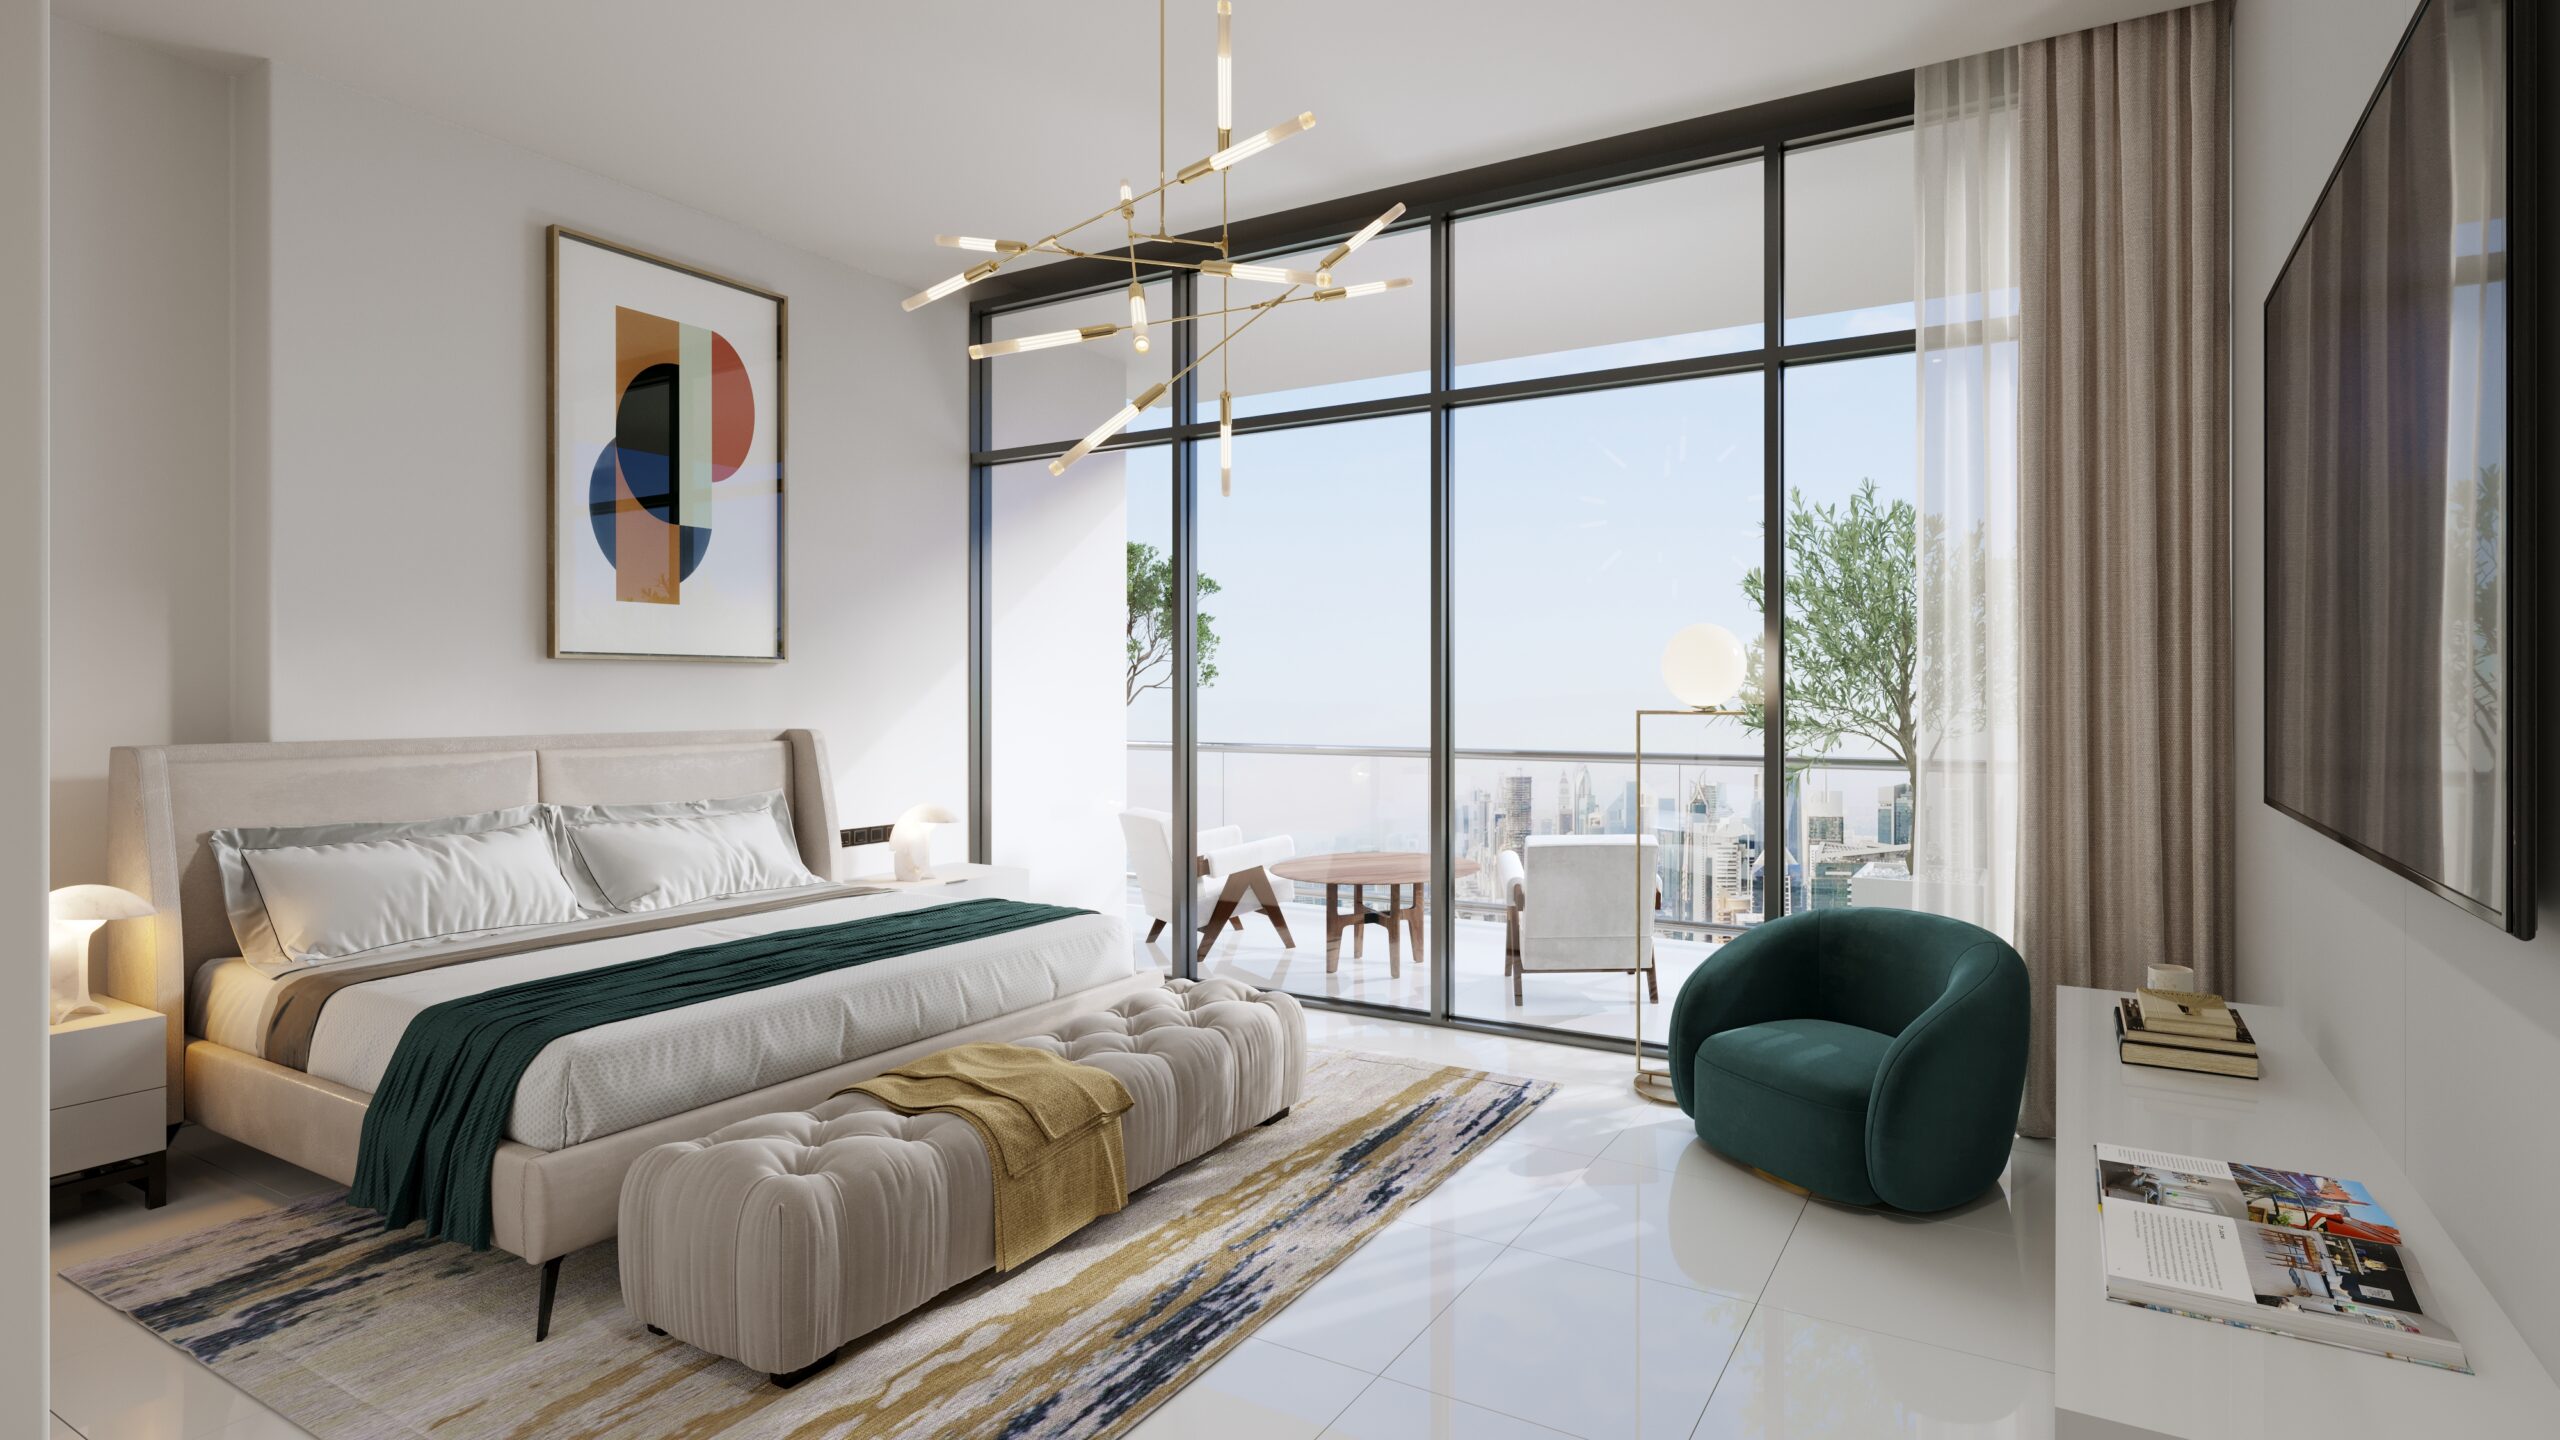 Primary bedroom with private balcony and views of the Dubai skyline